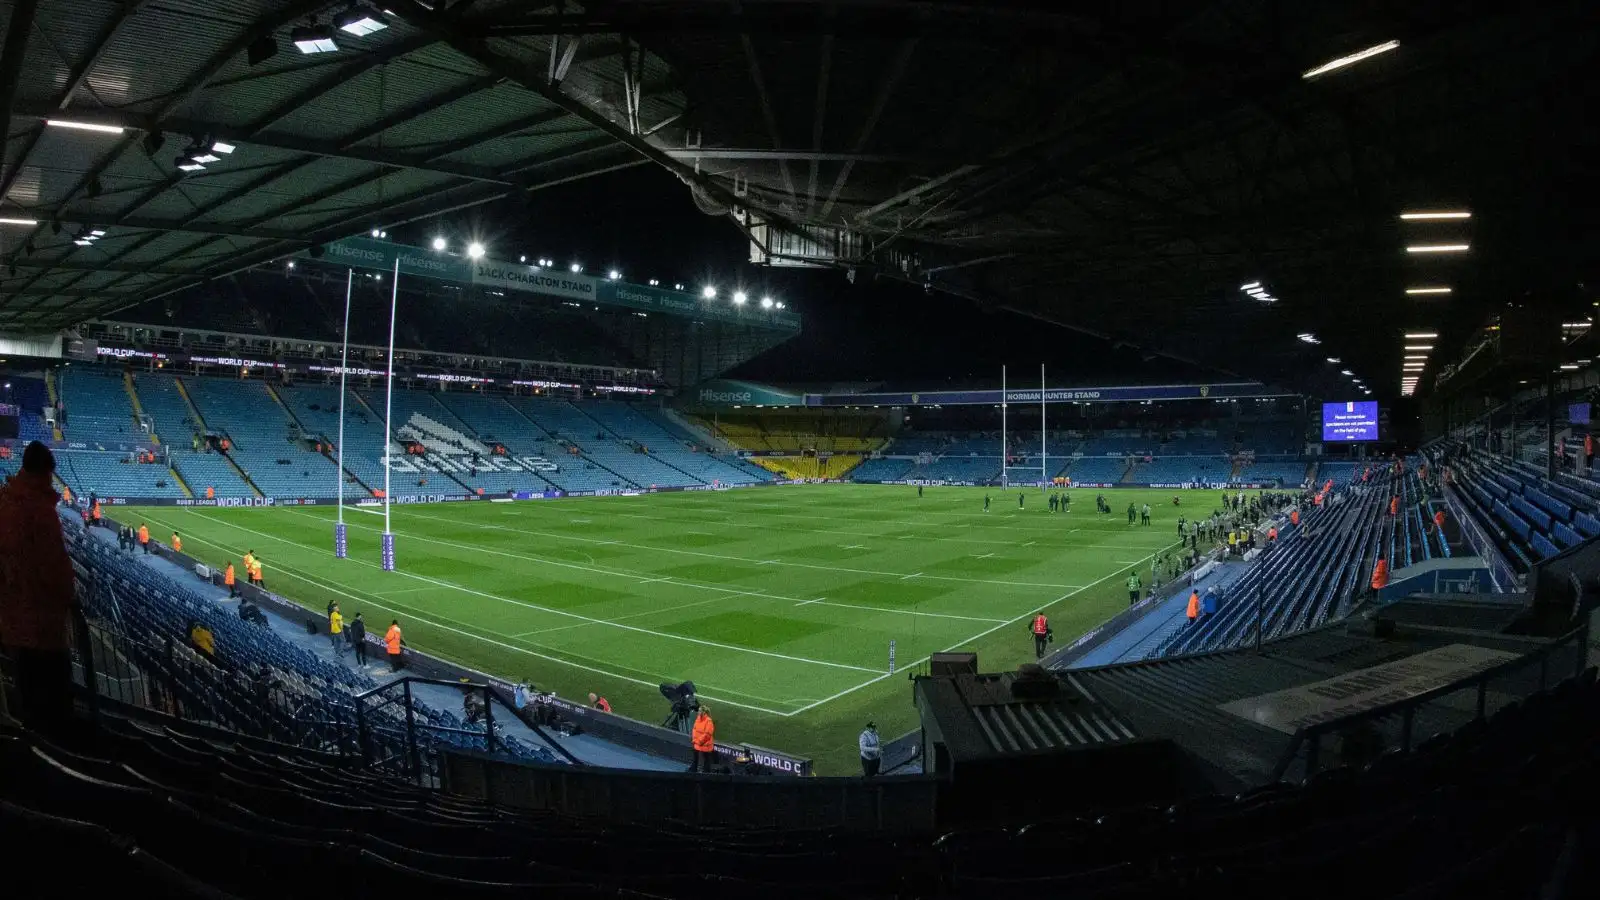 ‘We wanted to stay in Newcastle’ – but Magic Weekend could make new permanent home in Leeds